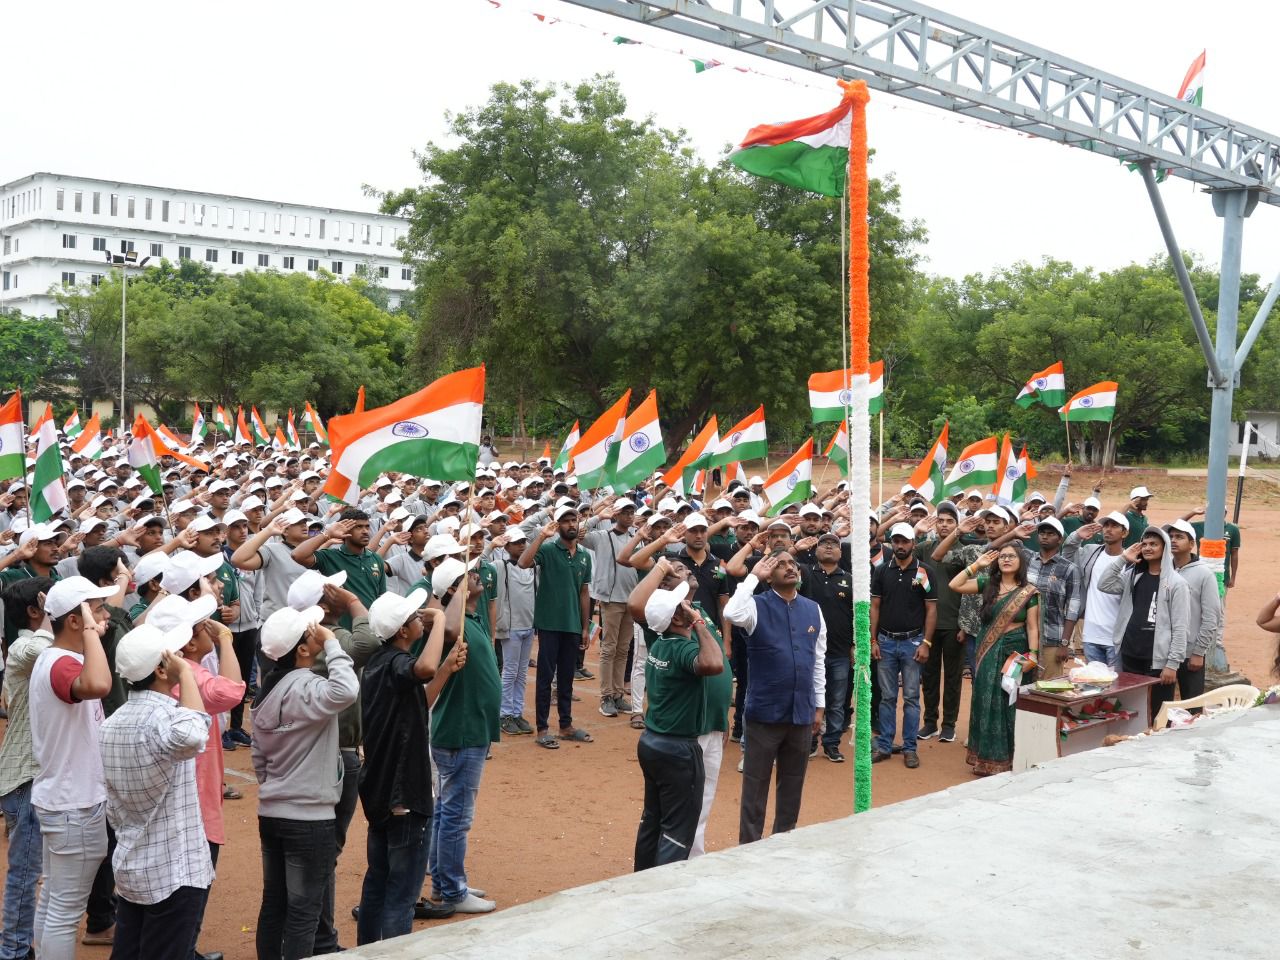 75th Independence Day Celebrations 